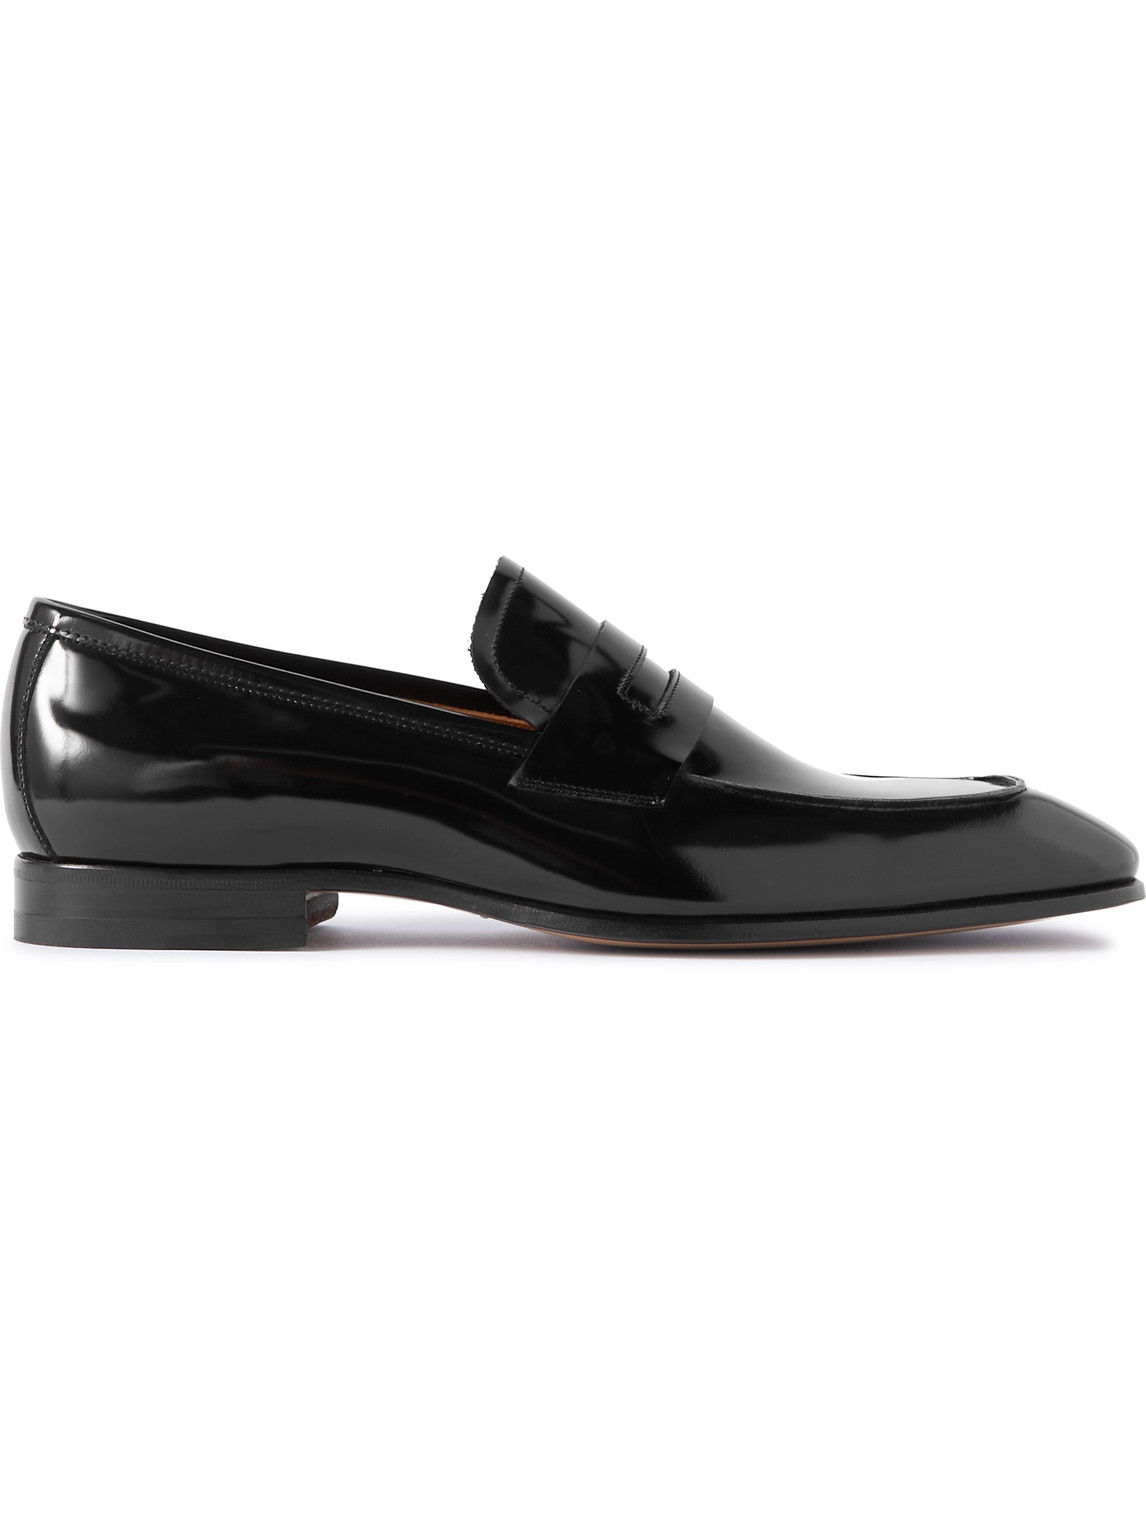 TOM FORD BAILEY PATENT-LEATHER PENNY LOAFERS